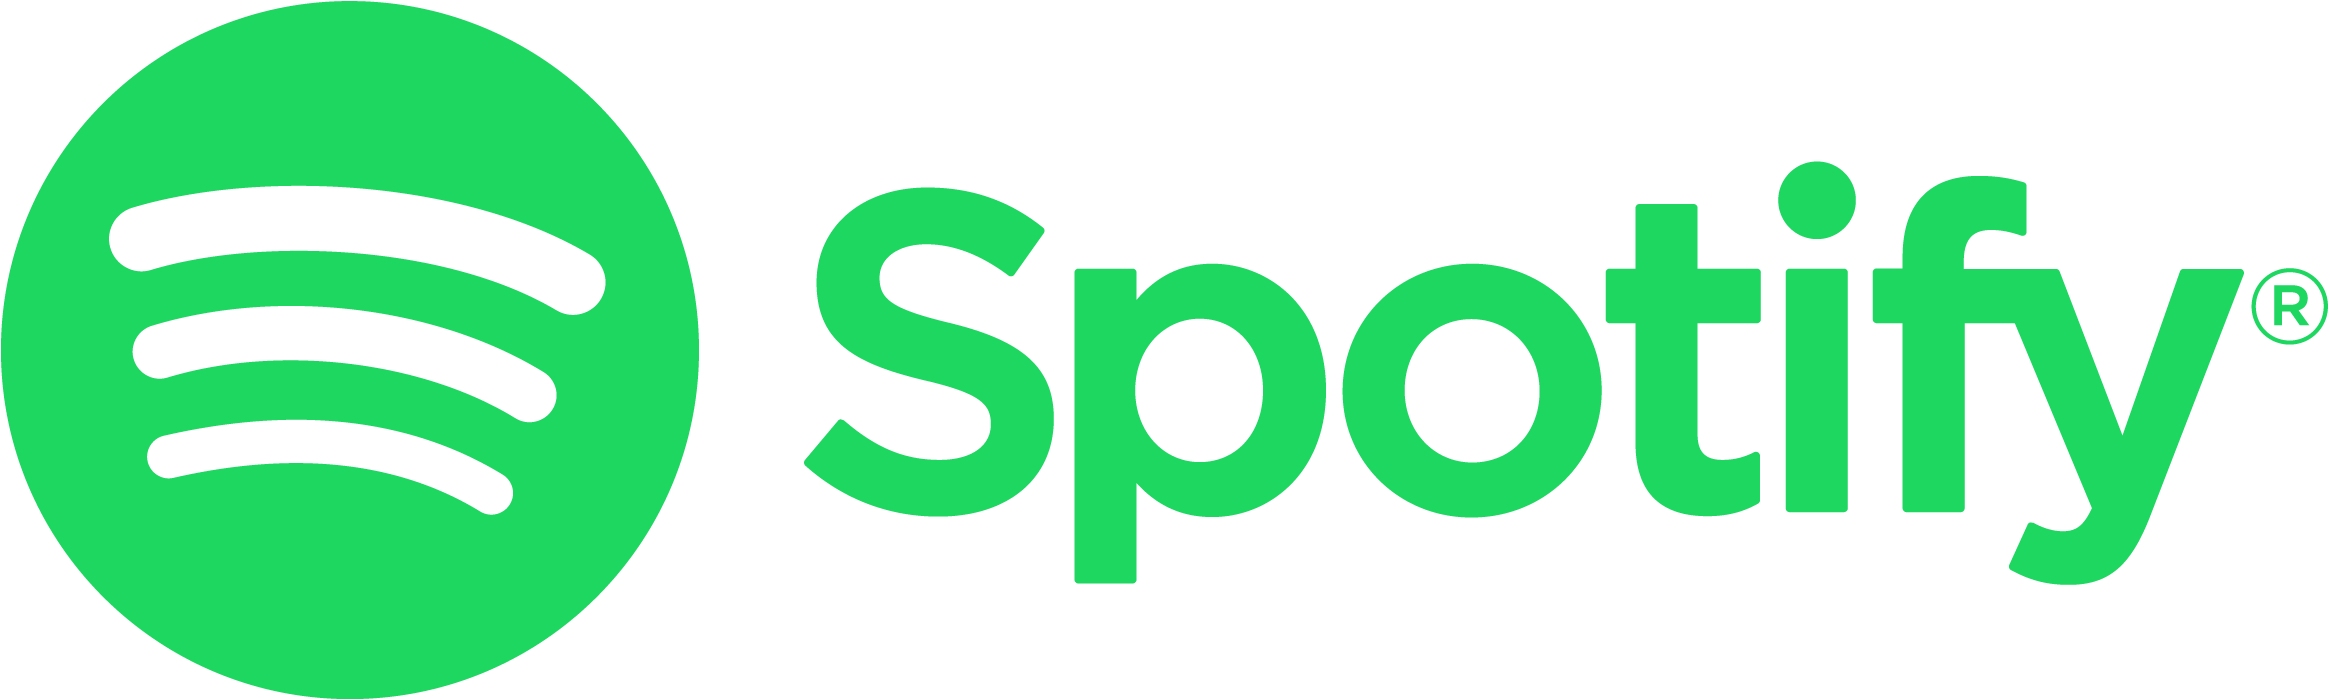 Spotify_logo_with_text-2